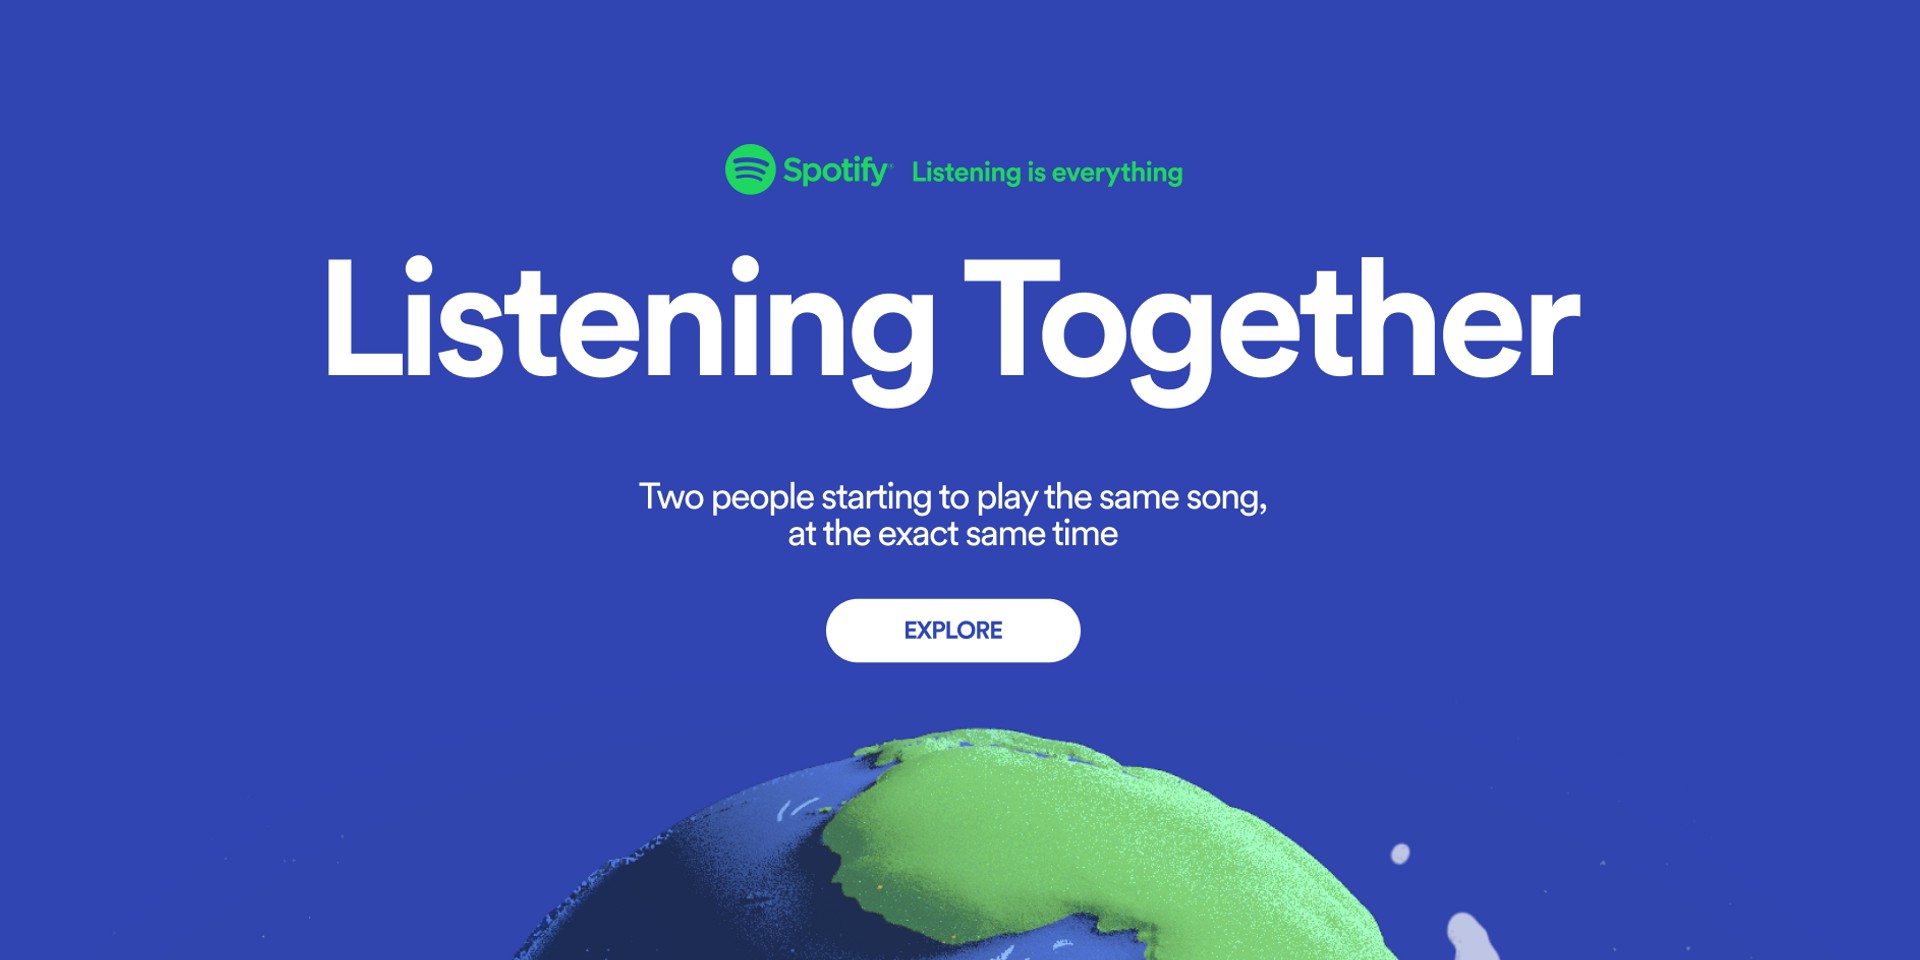 Watch two musical soulmates connect from across the world with Spotify's Listening Together